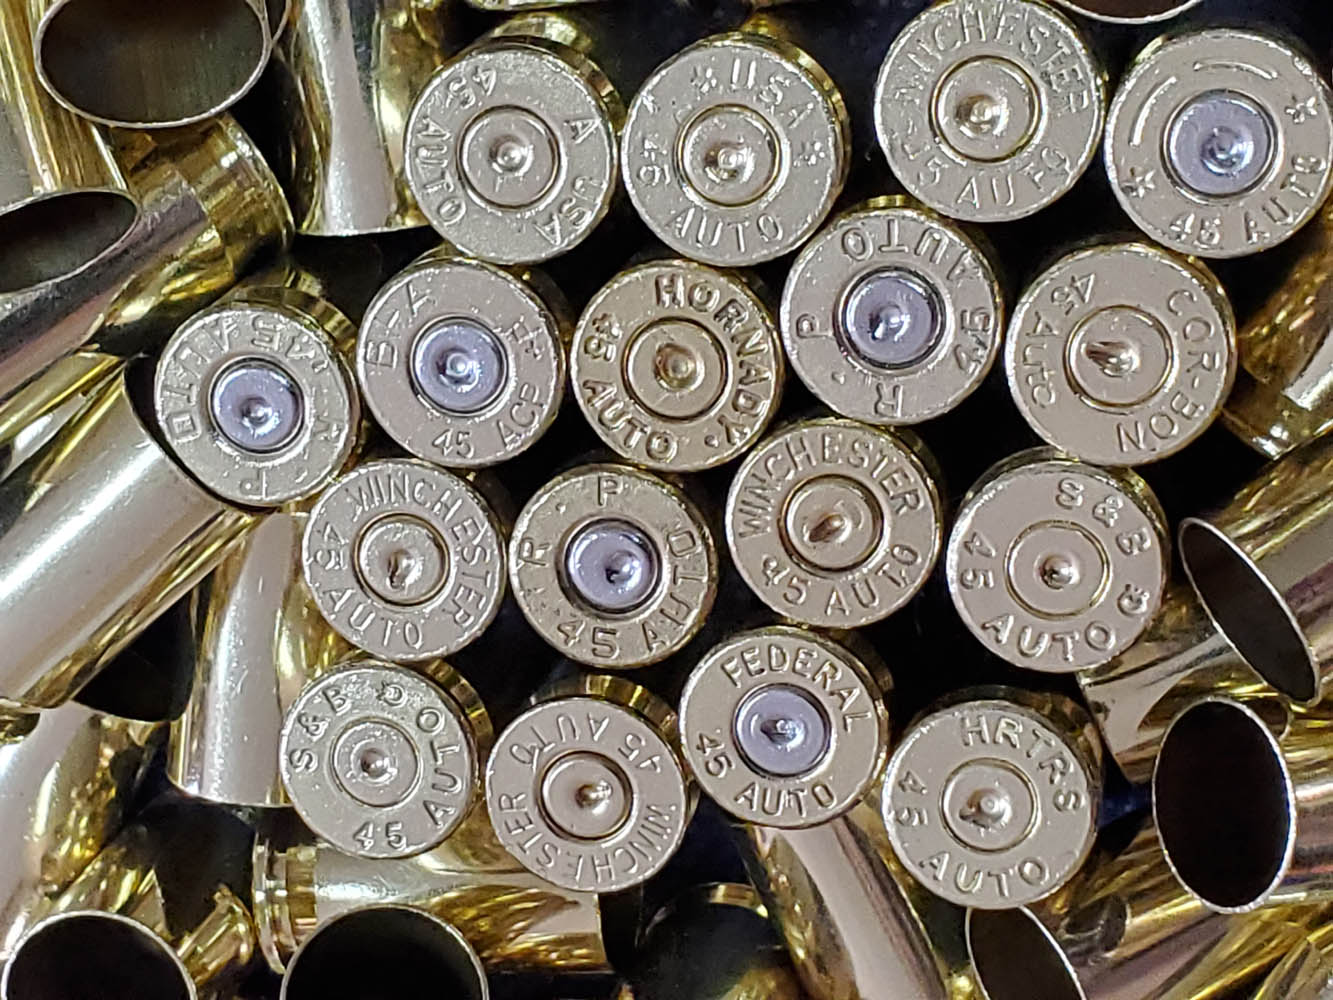 45 ACP Brass - Large Primer Pockets - Once Fired